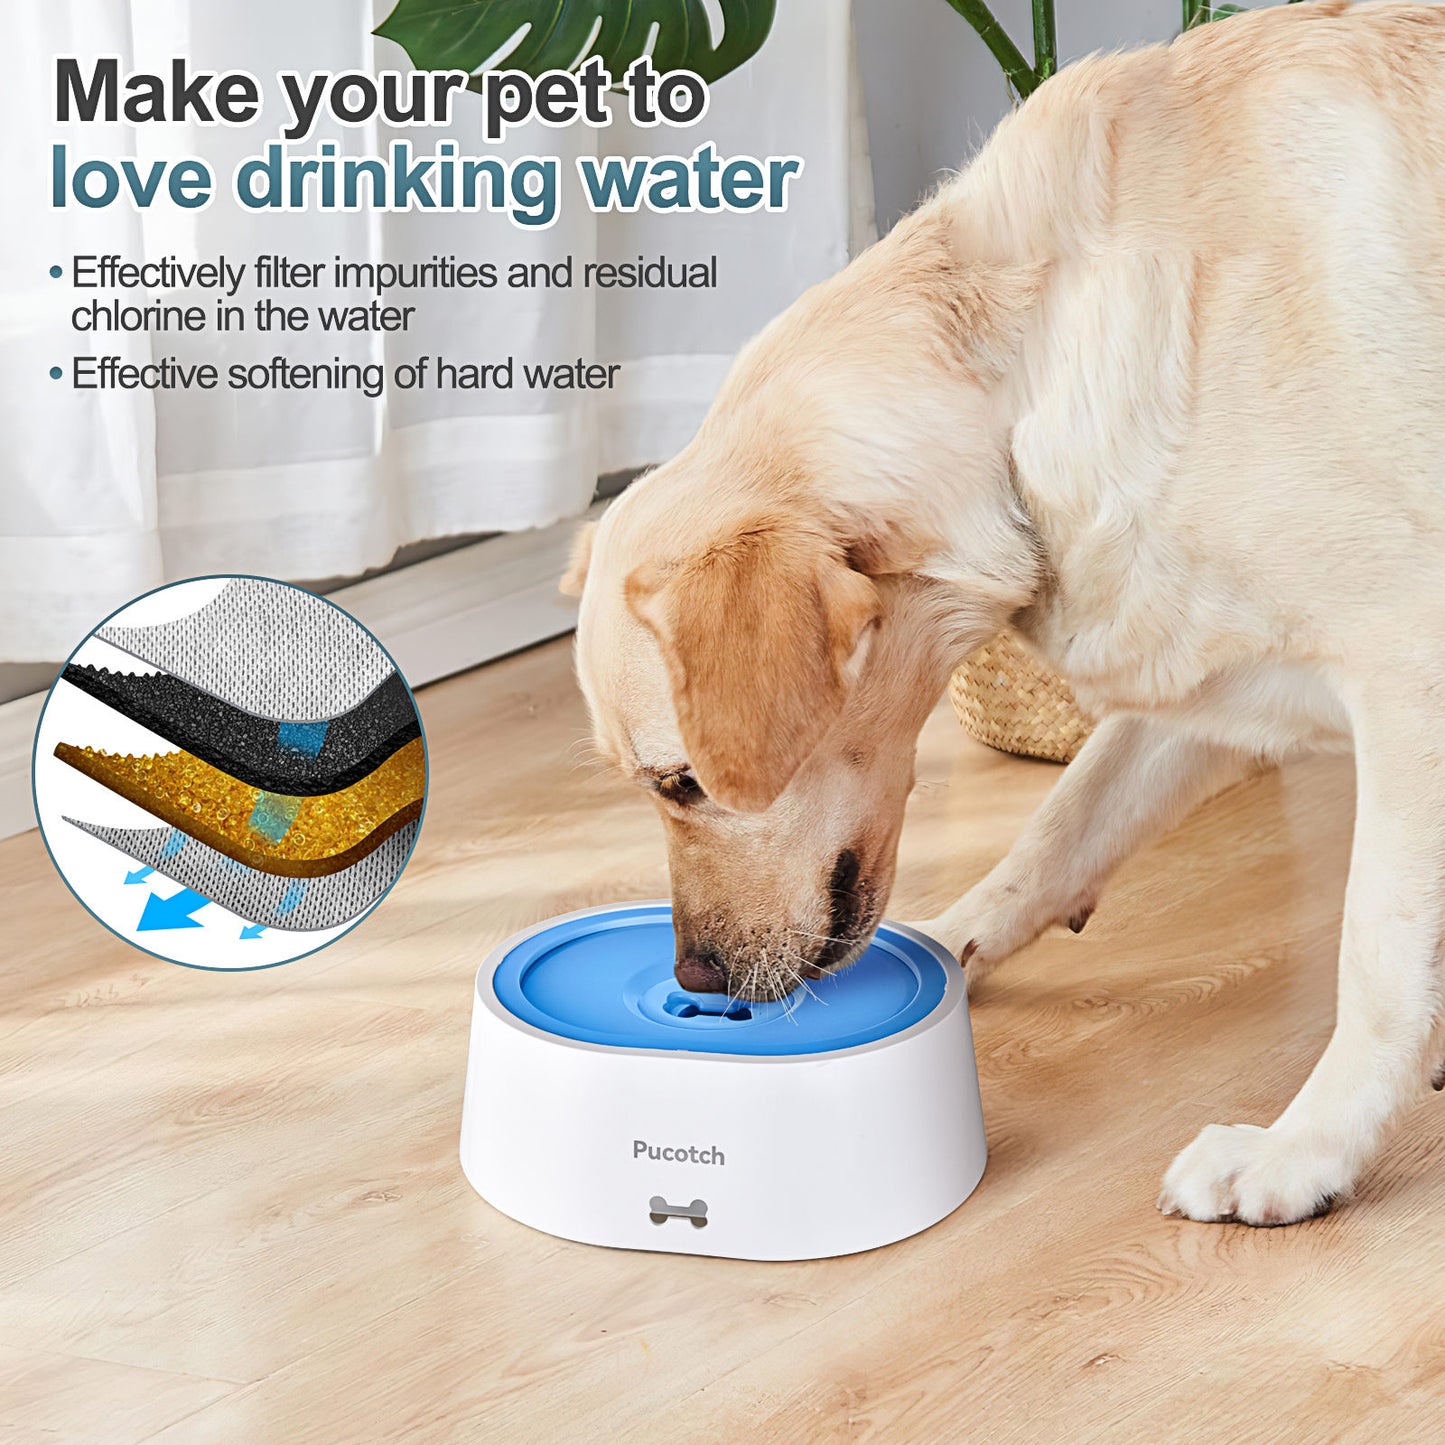 Dog Water Bowl No Spill 2L/70oz Spill Proof Dog Water Bowl Slow Water Feeder for Dogs No Splash Pet Water Bowl Dispenser for Messy Drinkers Vehicle Travel Dog Water Bowl,BPA Free